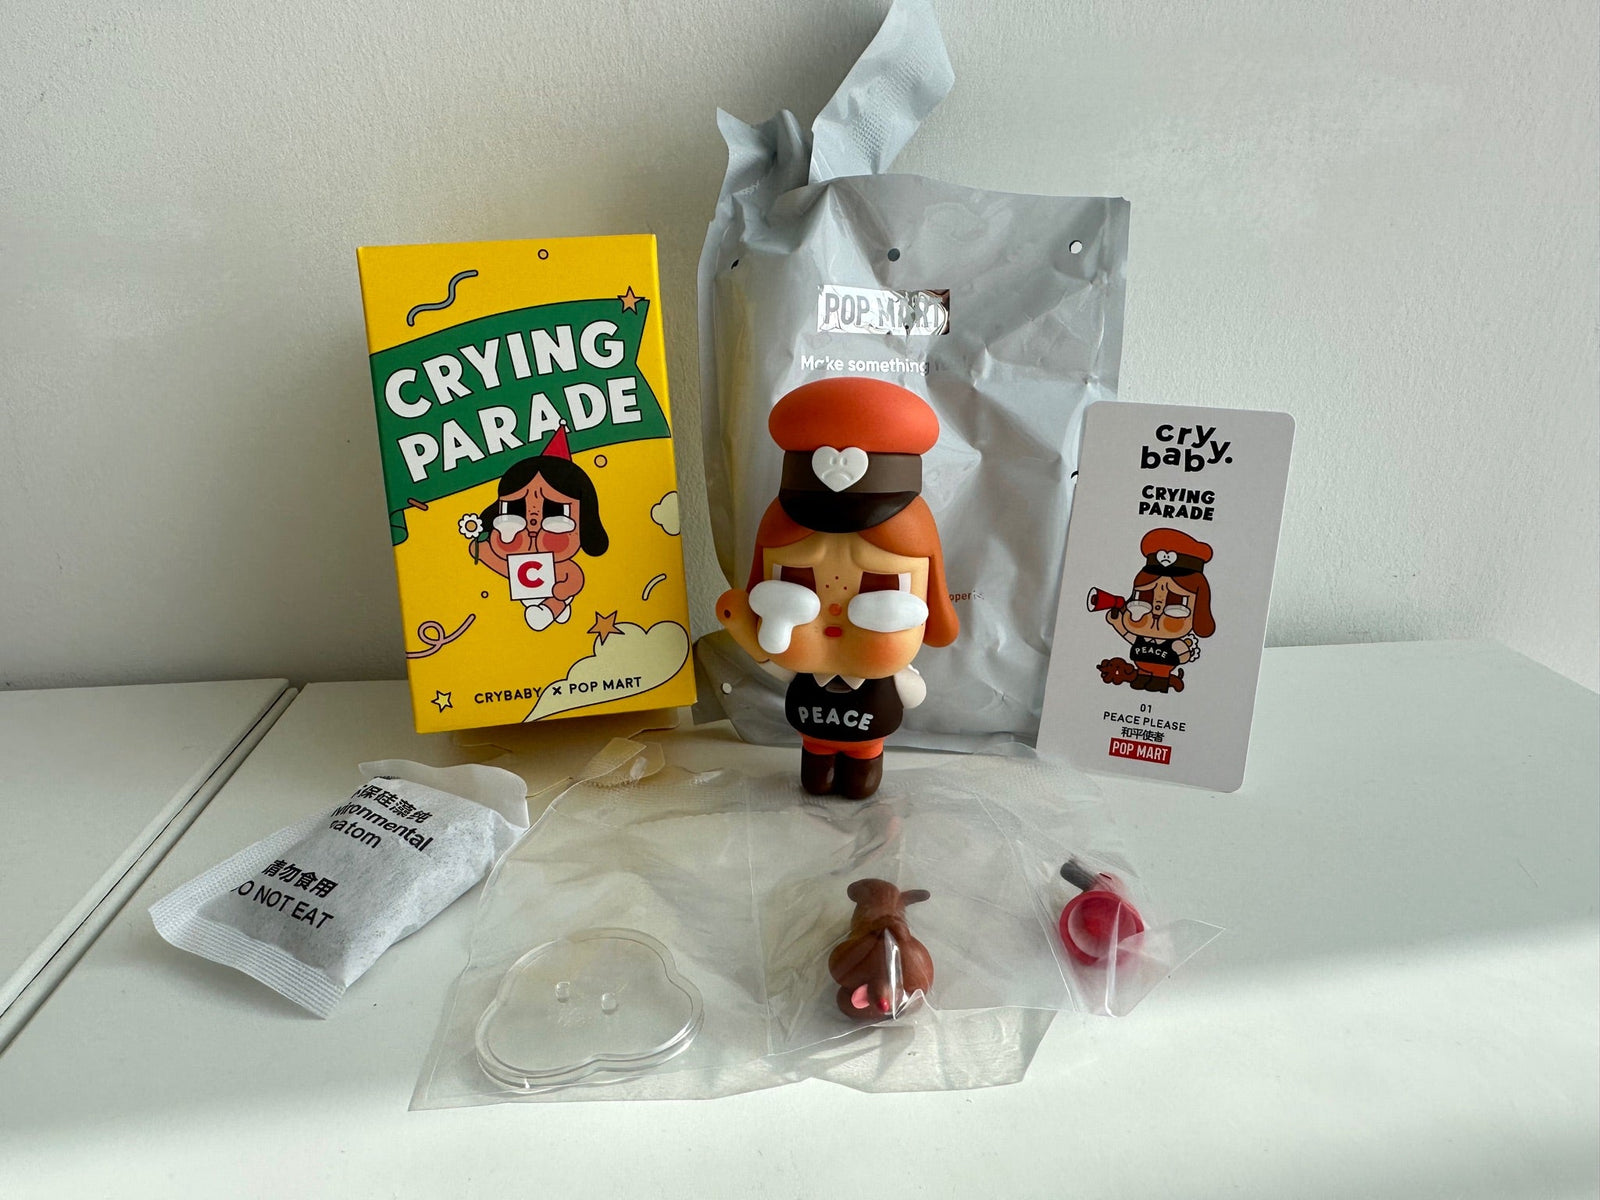 PEACE PLEASE - CRYBABY Crying Parade Series by POP MART - 1